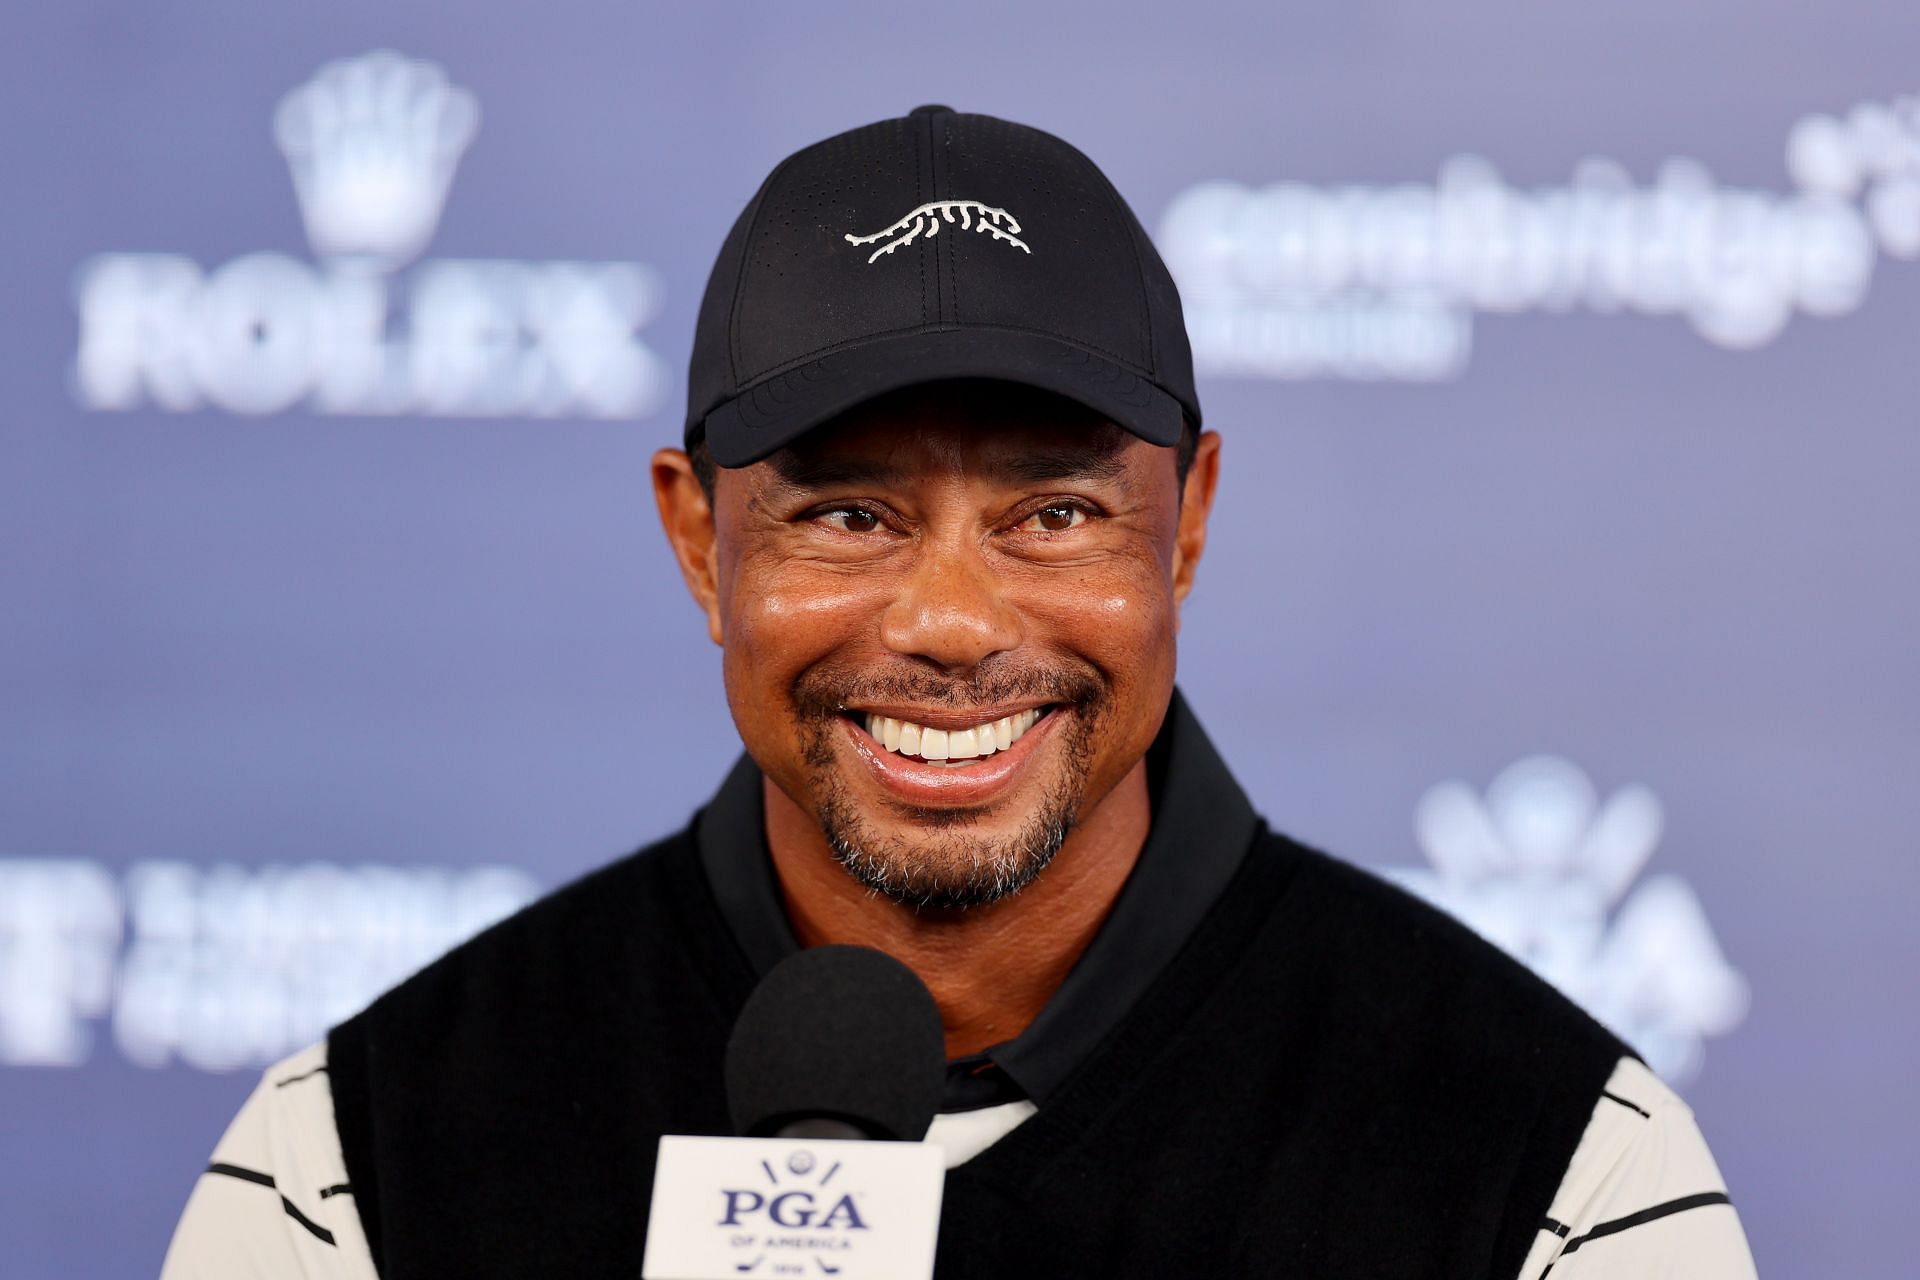 Can Tiger Woods earn another Major victory?